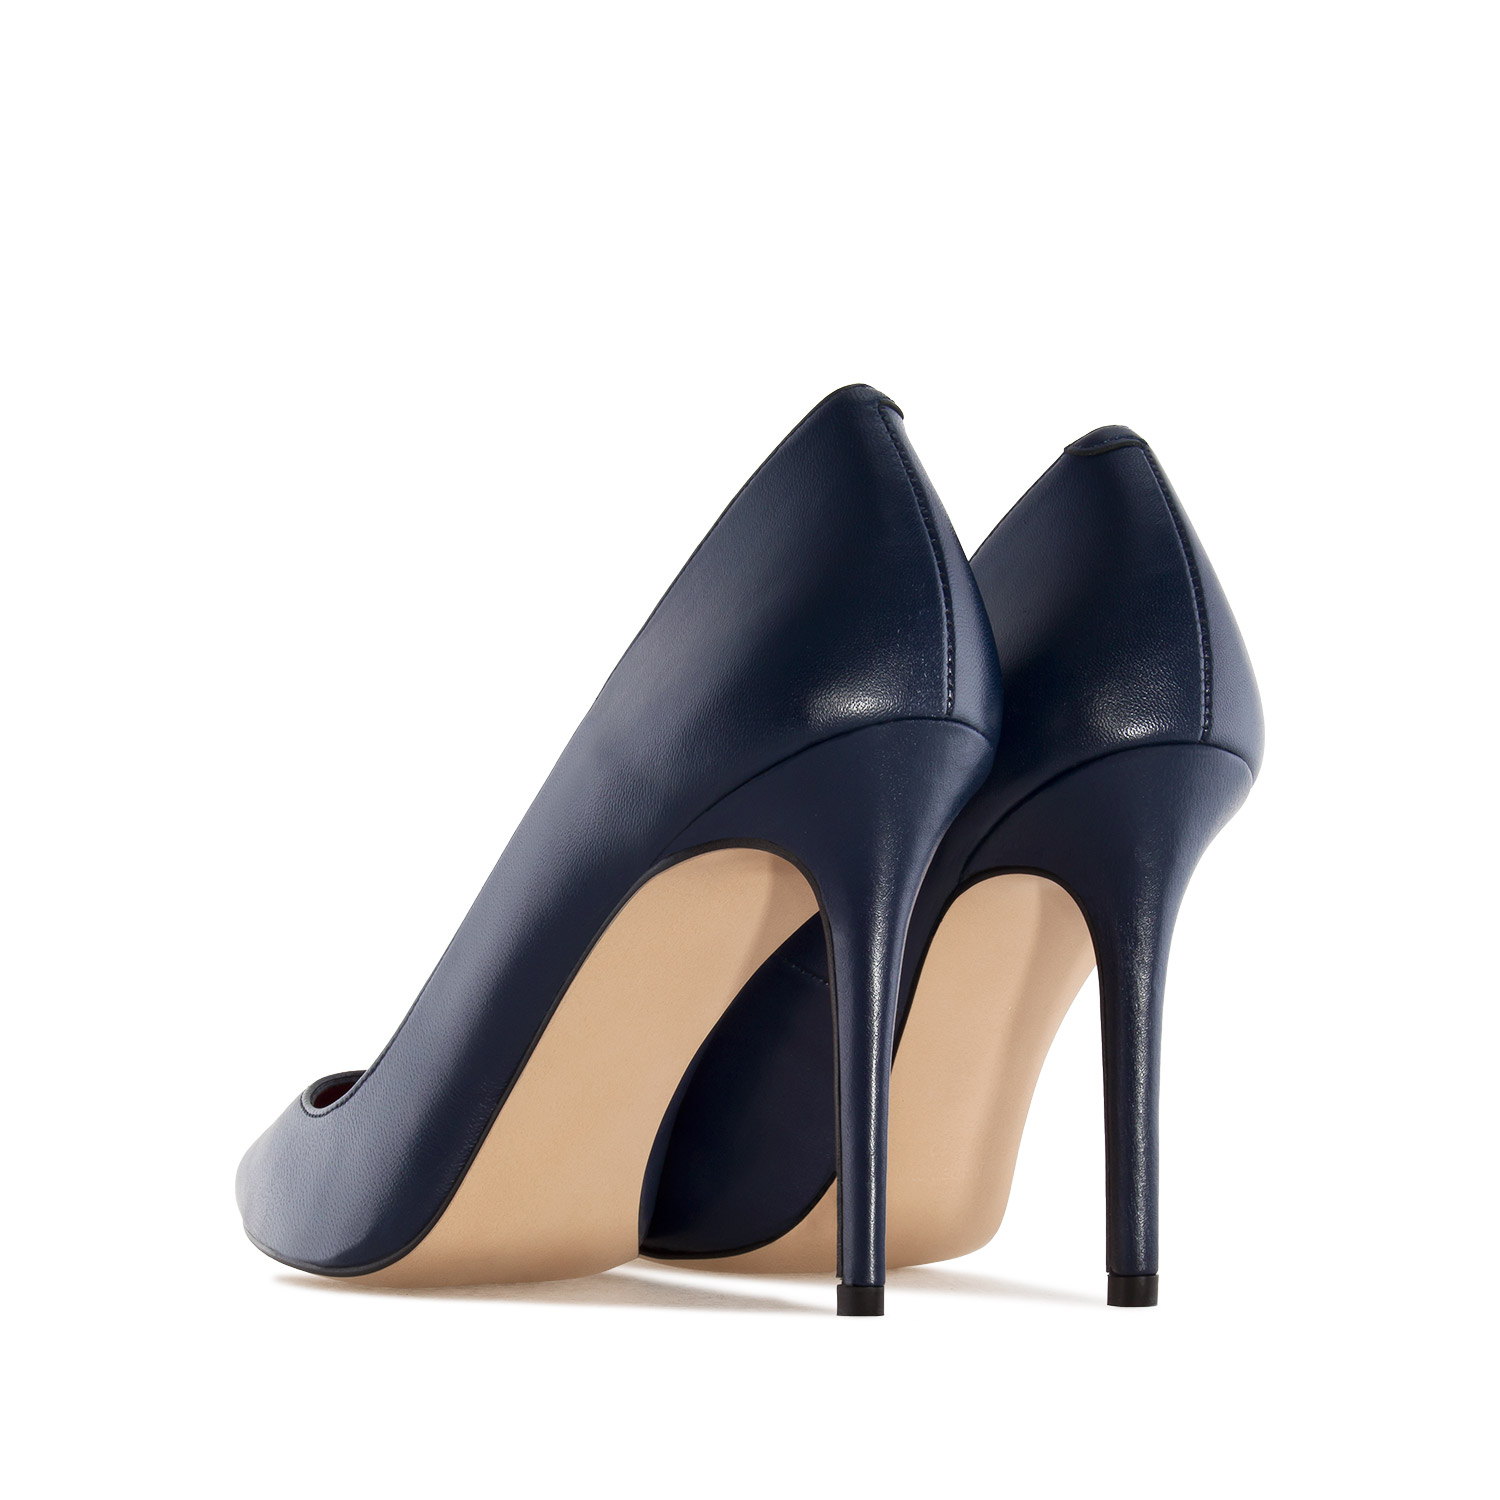 Heeled Shoes in Navy Nappa Leather 